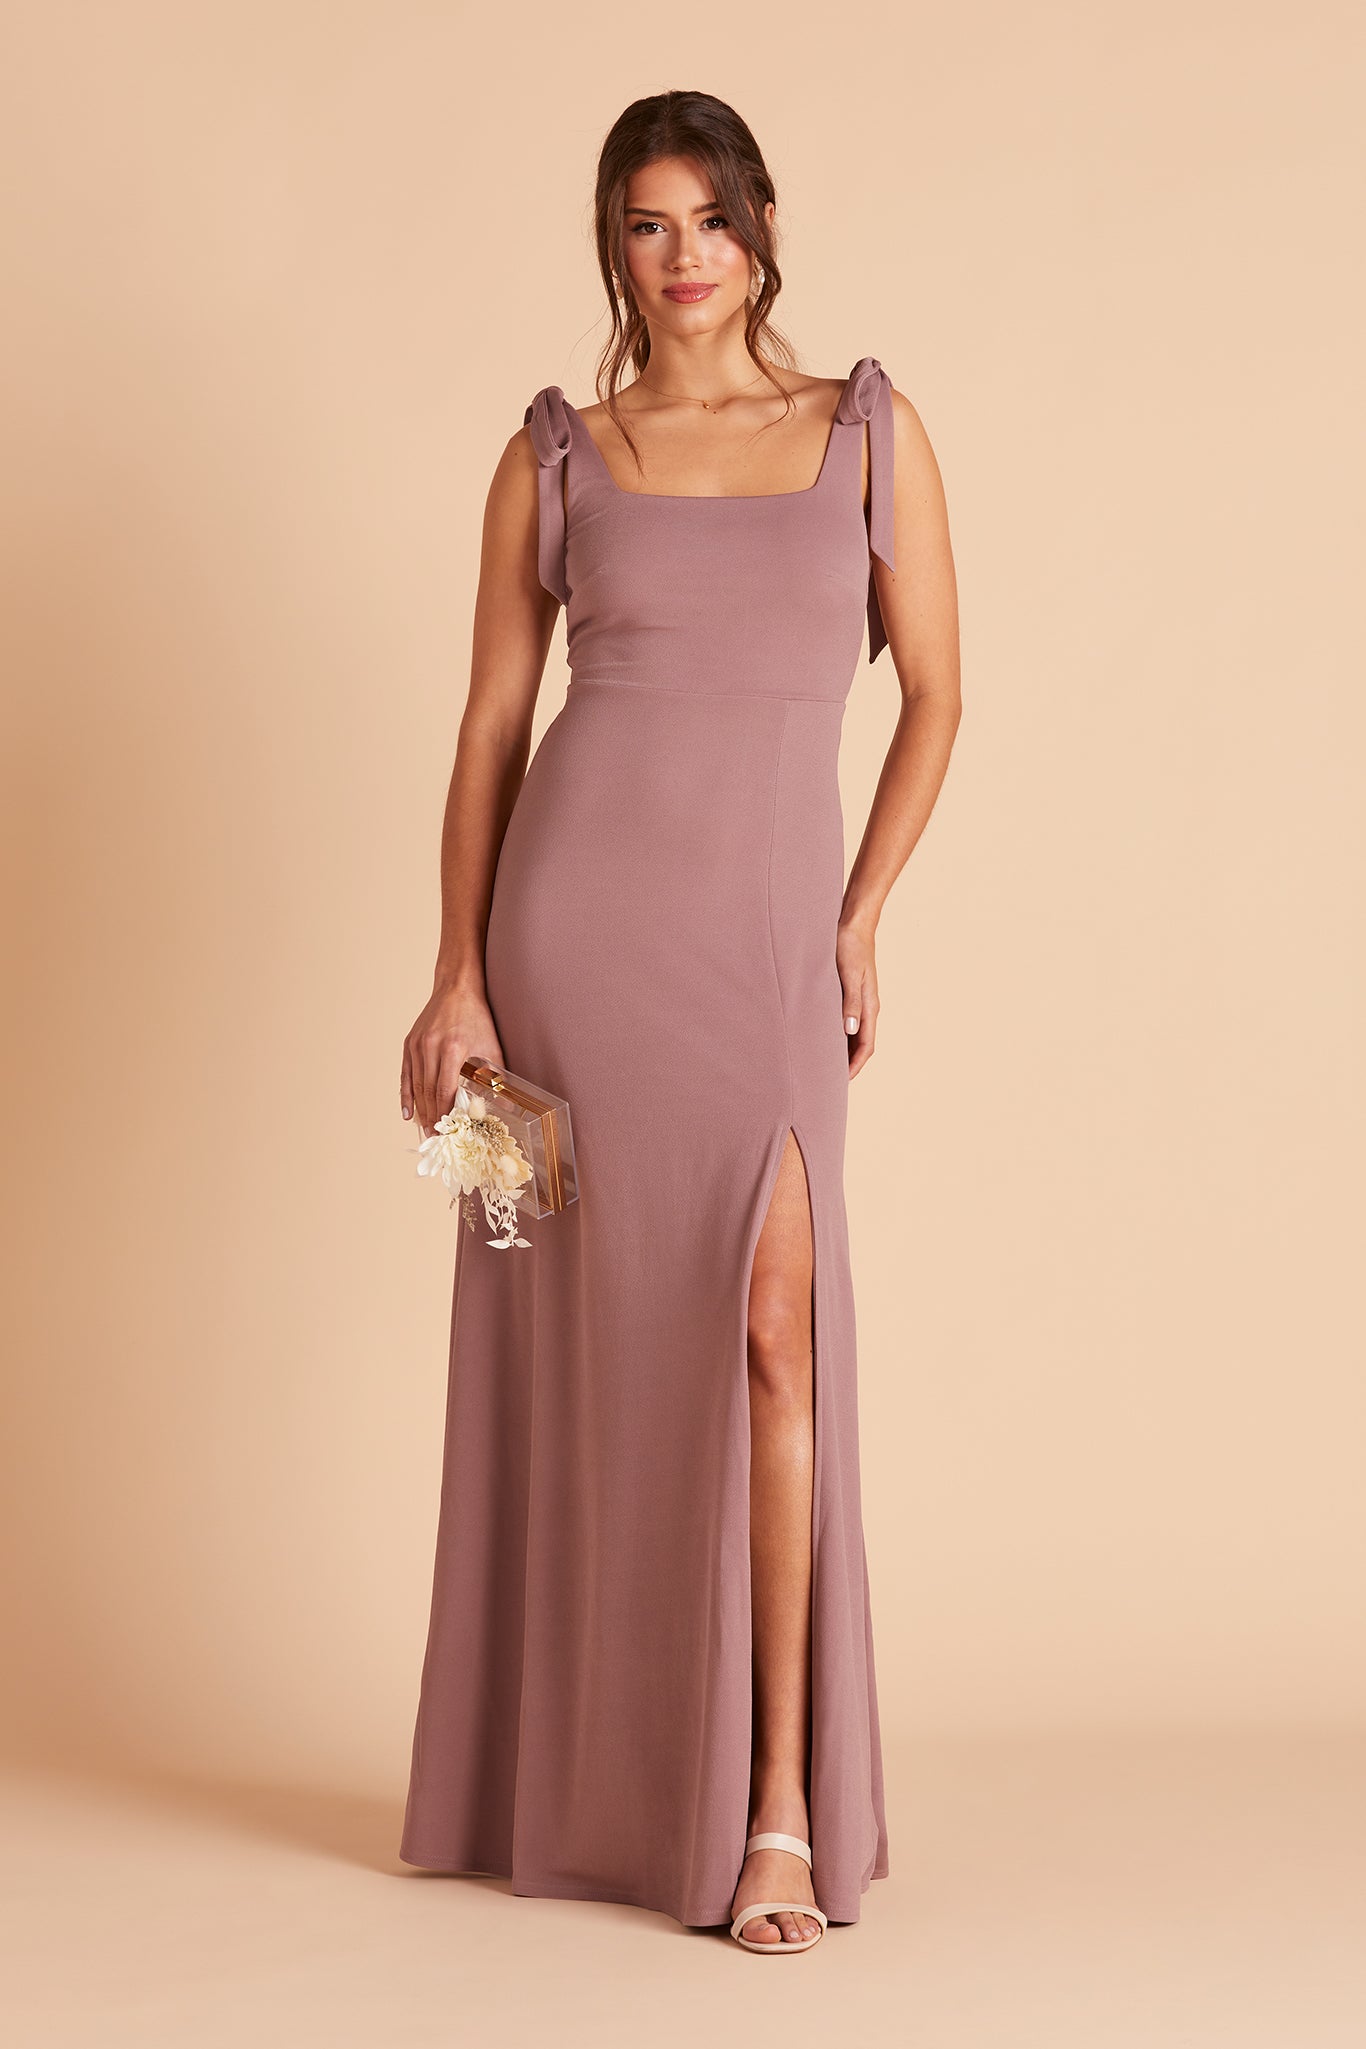 Alex convertible bridesmaid dress with slit in dark mauve crepe by Birdy Grey, front view